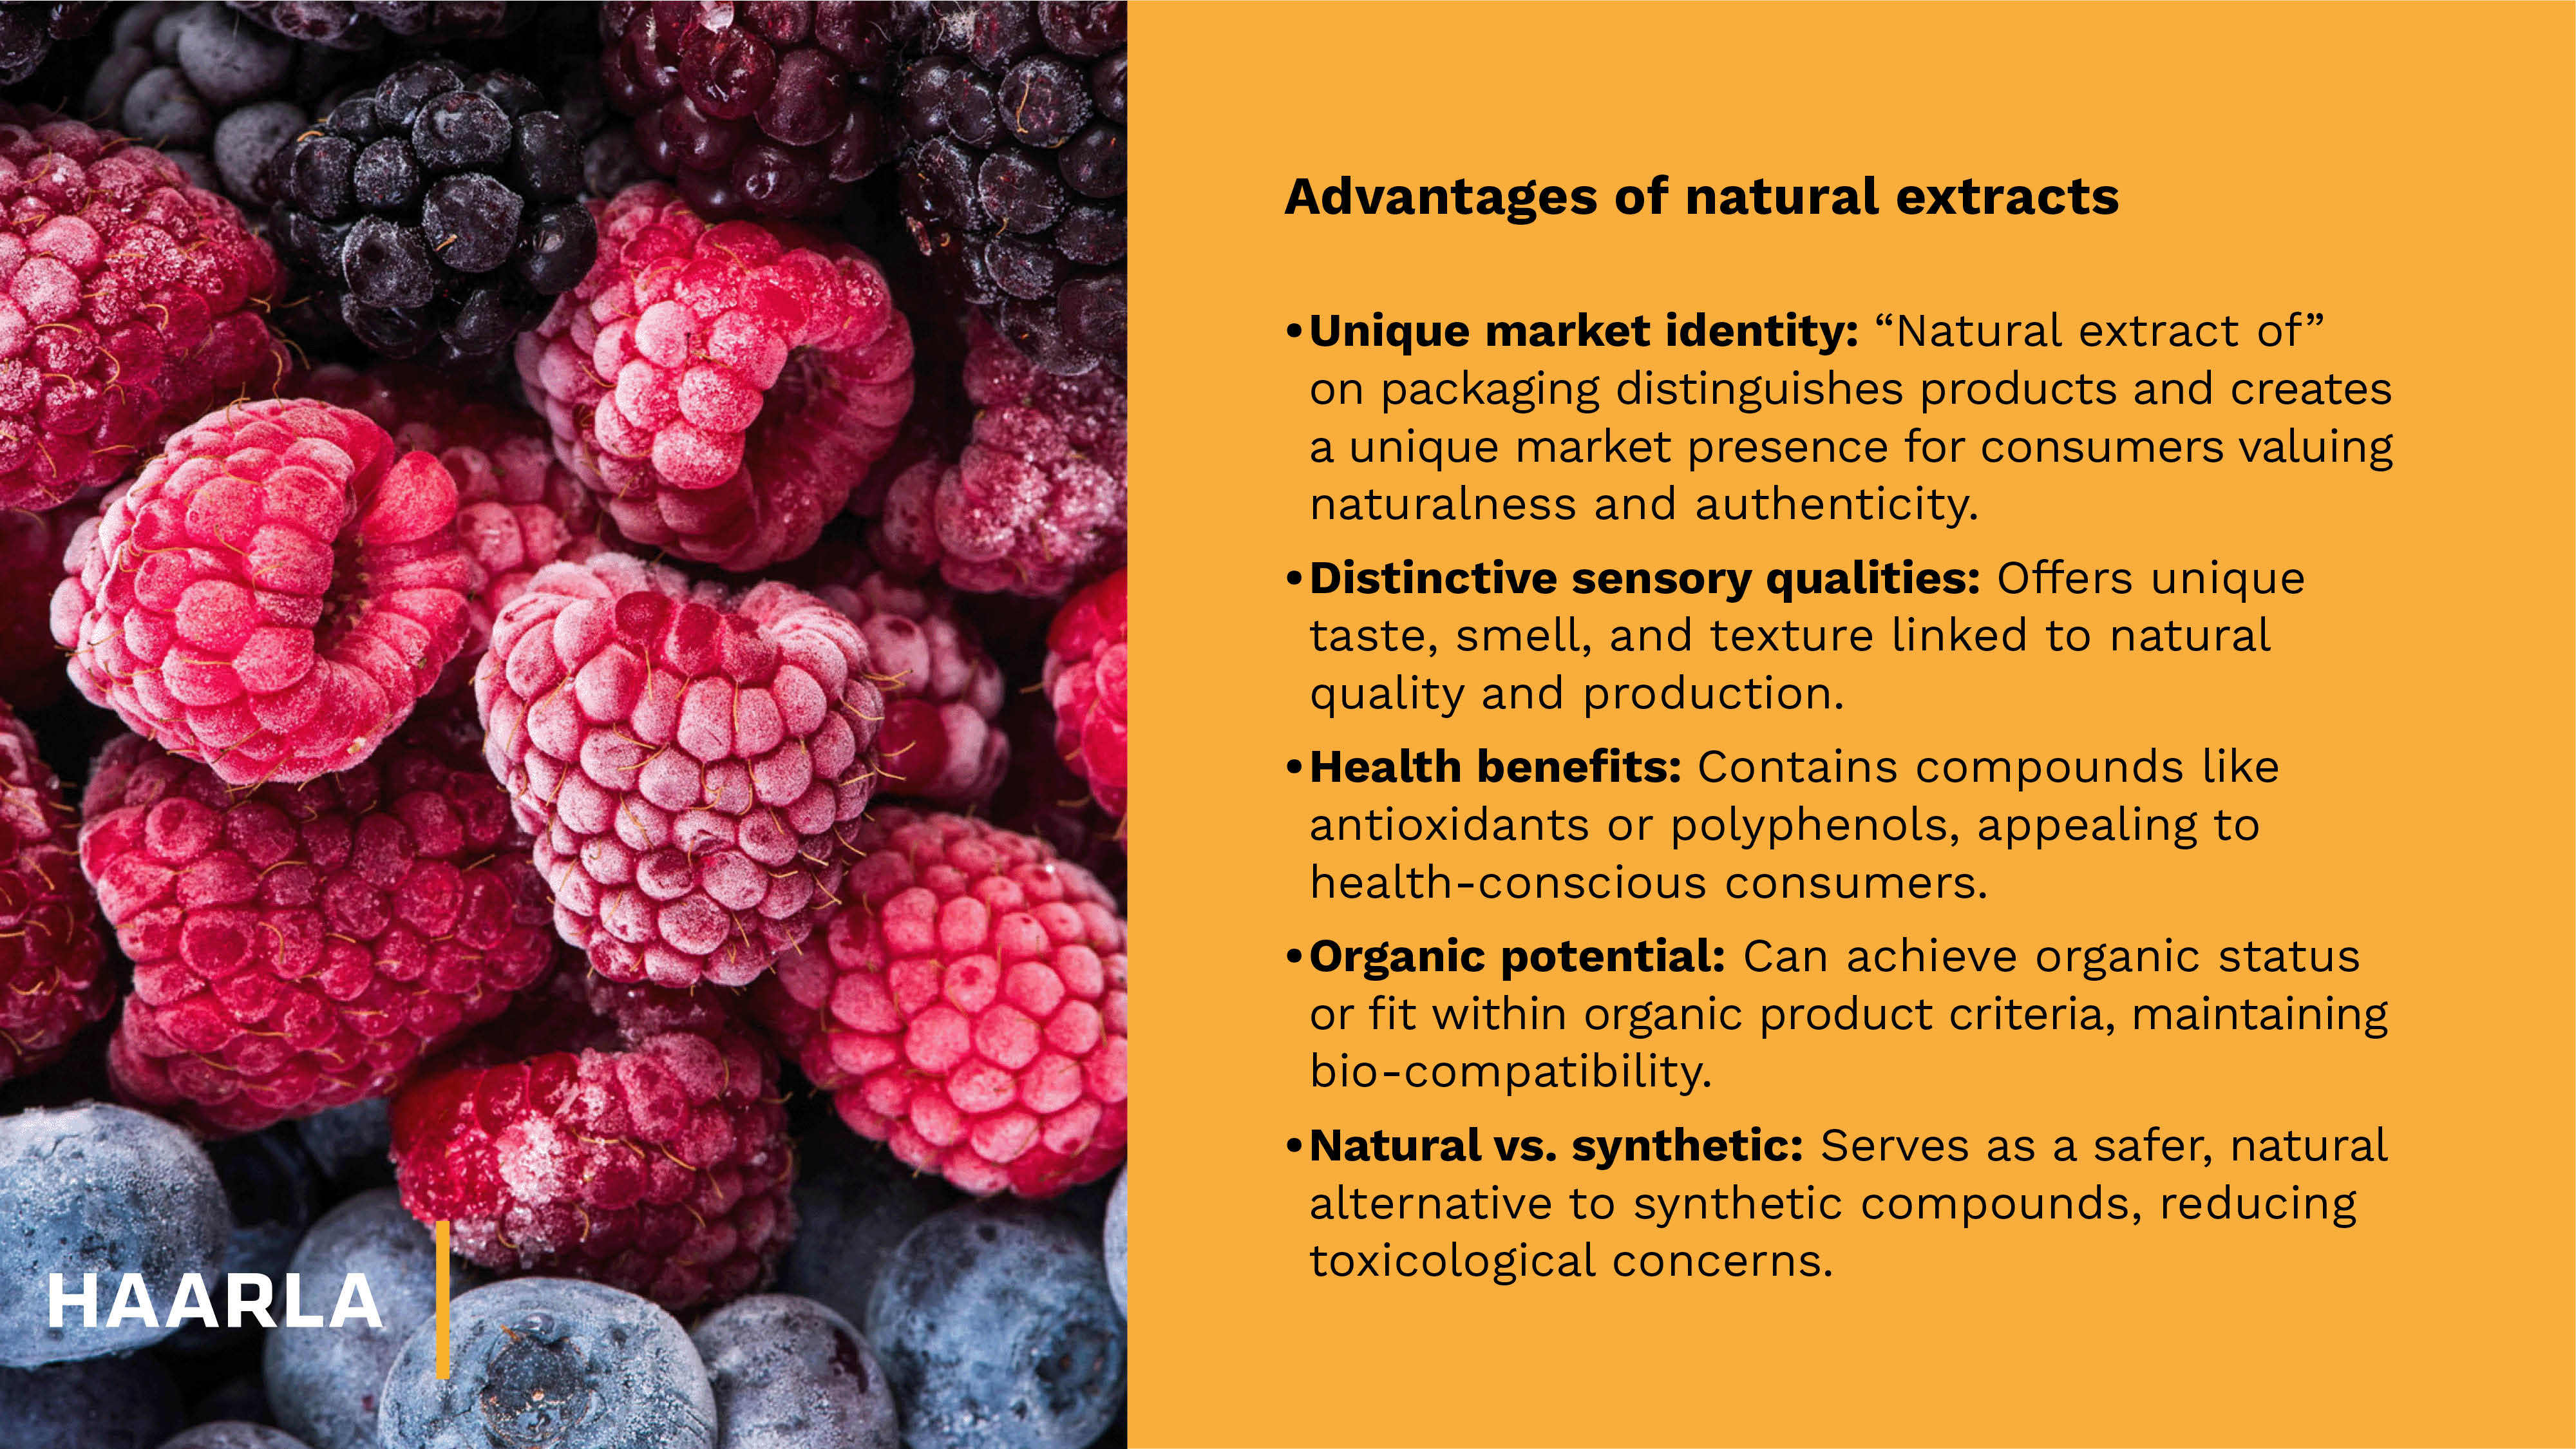 Haarla_Advantages of natural extracts_infographic_240118